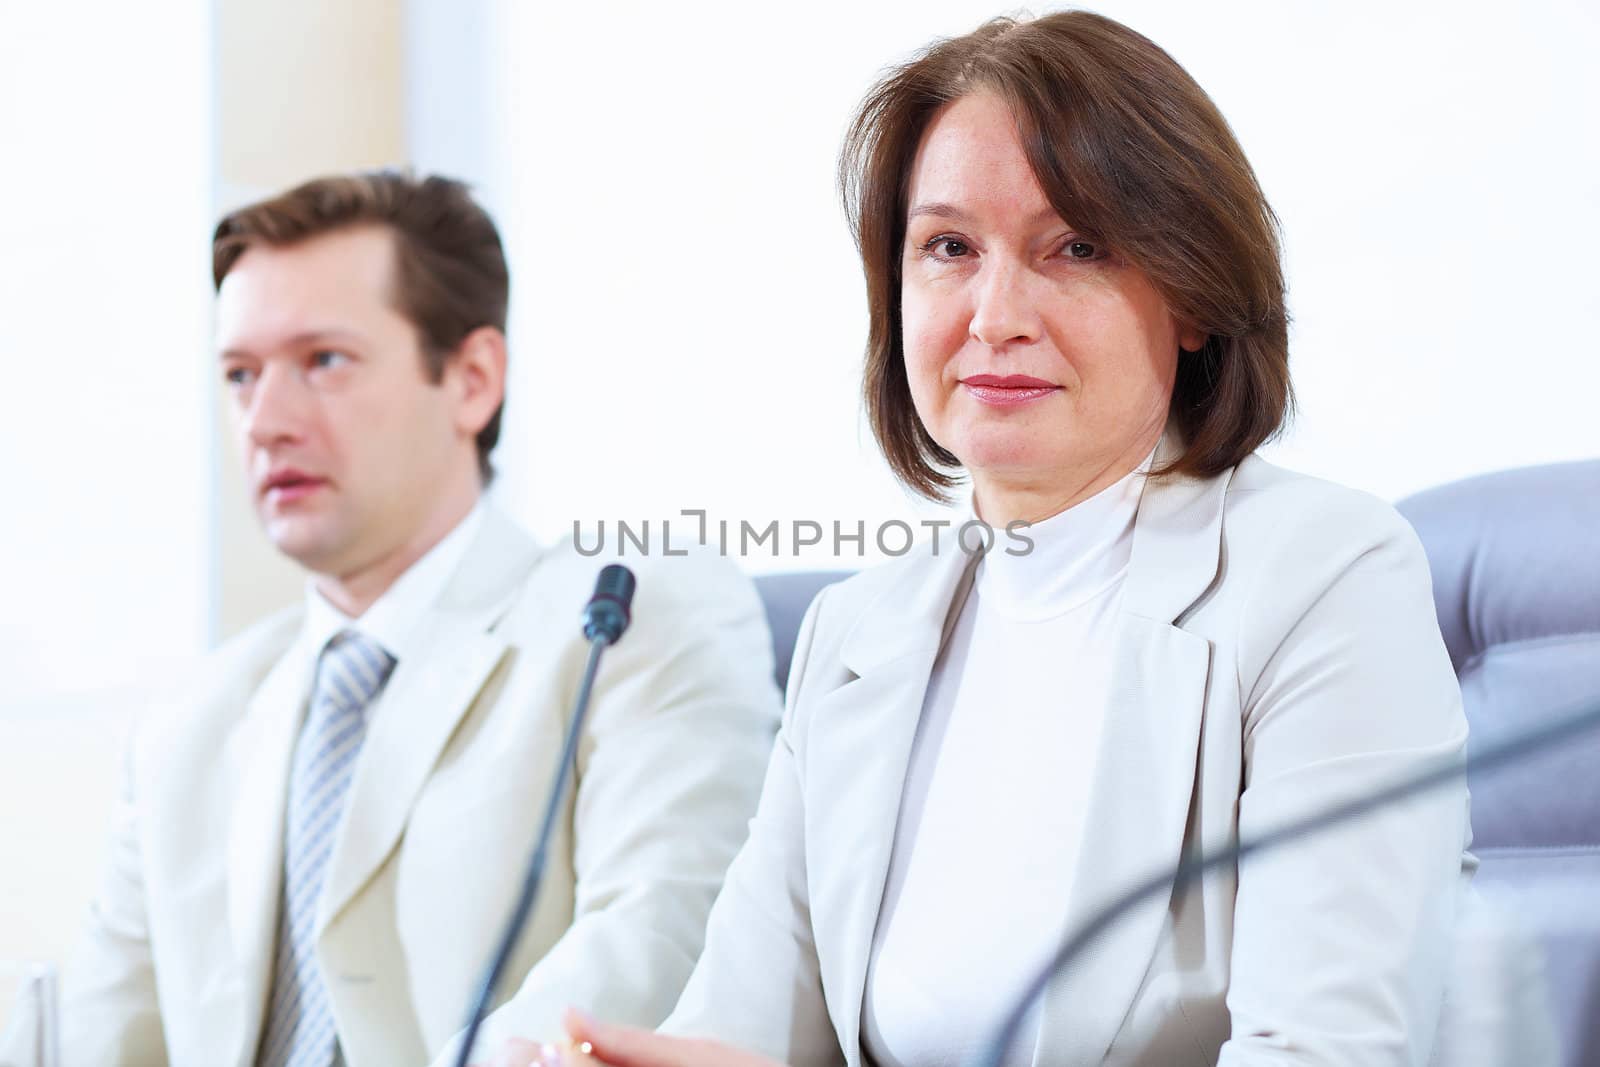 Image of two businesspeople sitting at table at conference